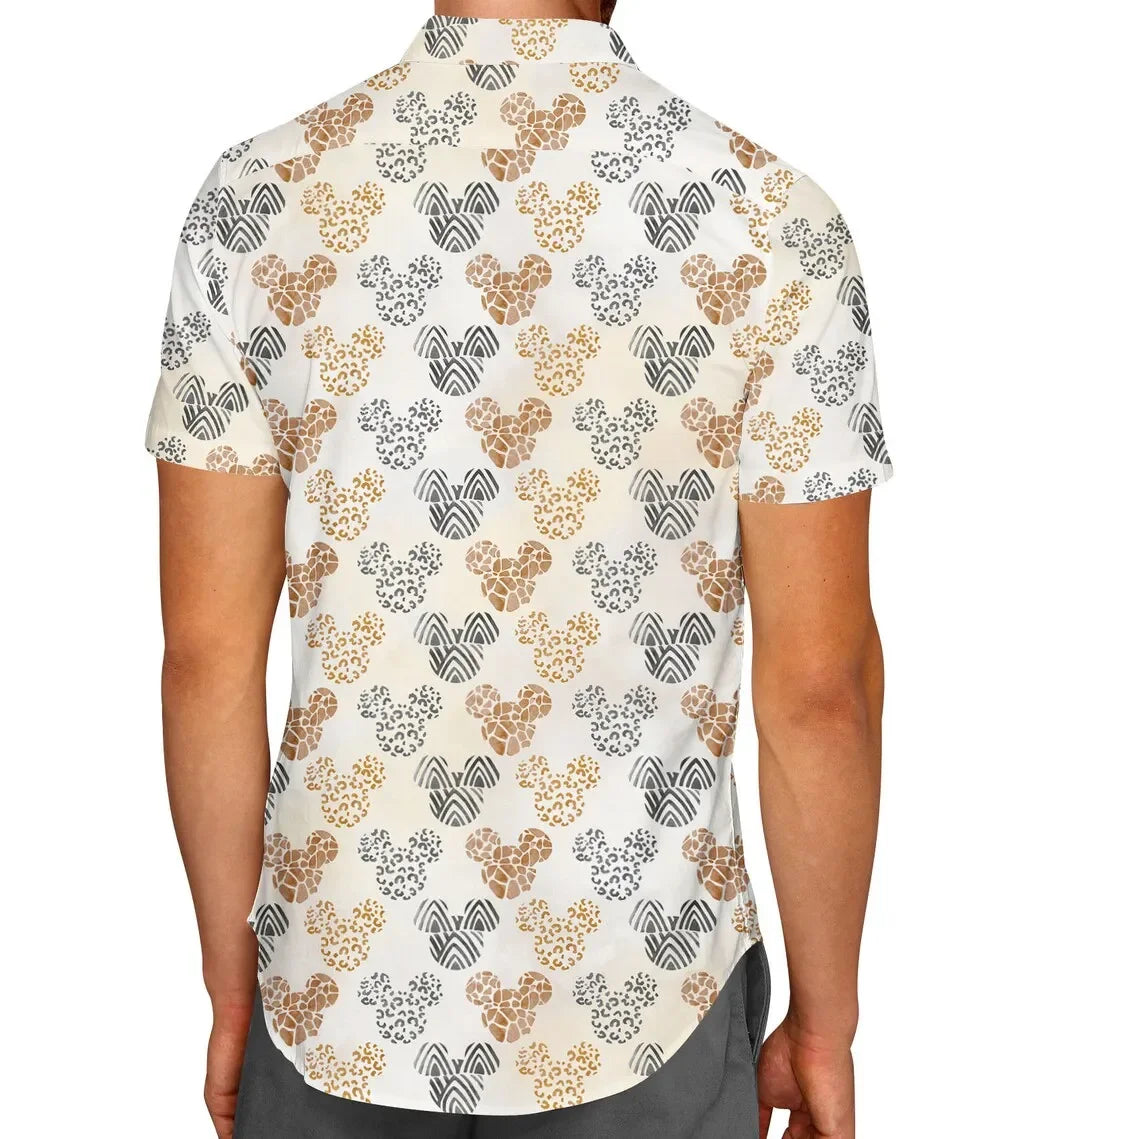 Men's Button-Up Mickey Mouse Patterns Business Casual Beach Shirt